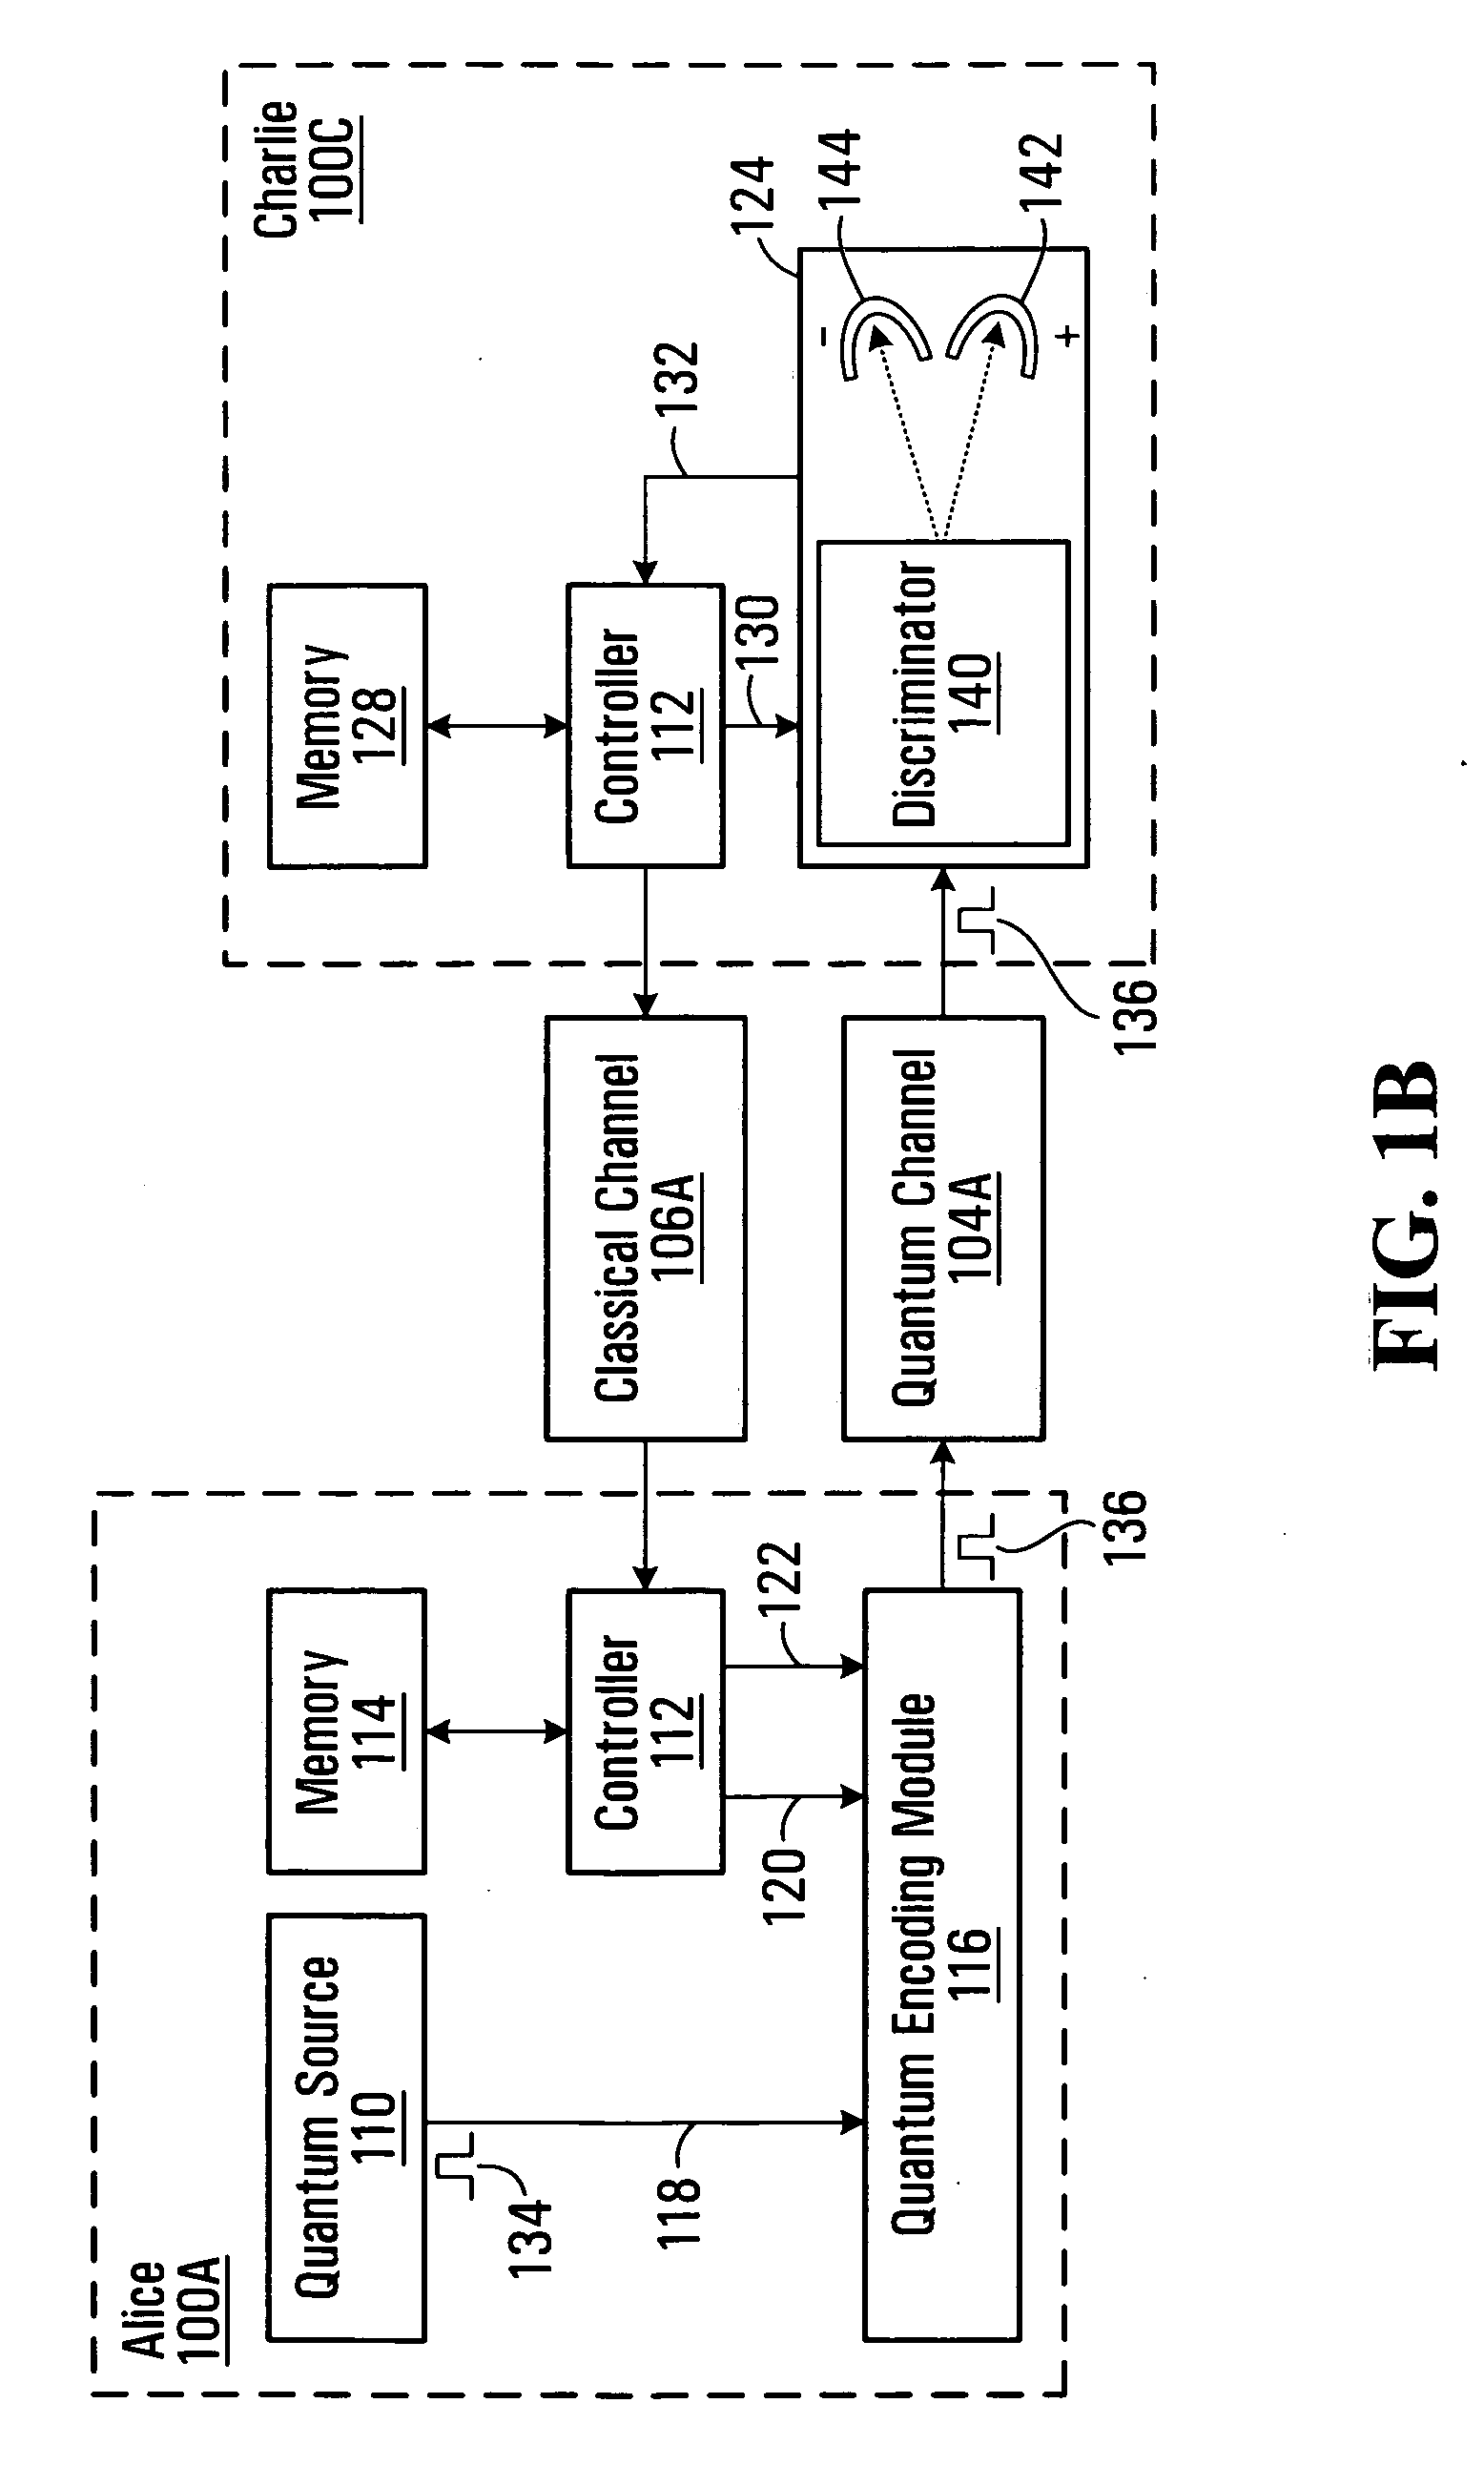 Methods and systems for communicating over a quantum channel